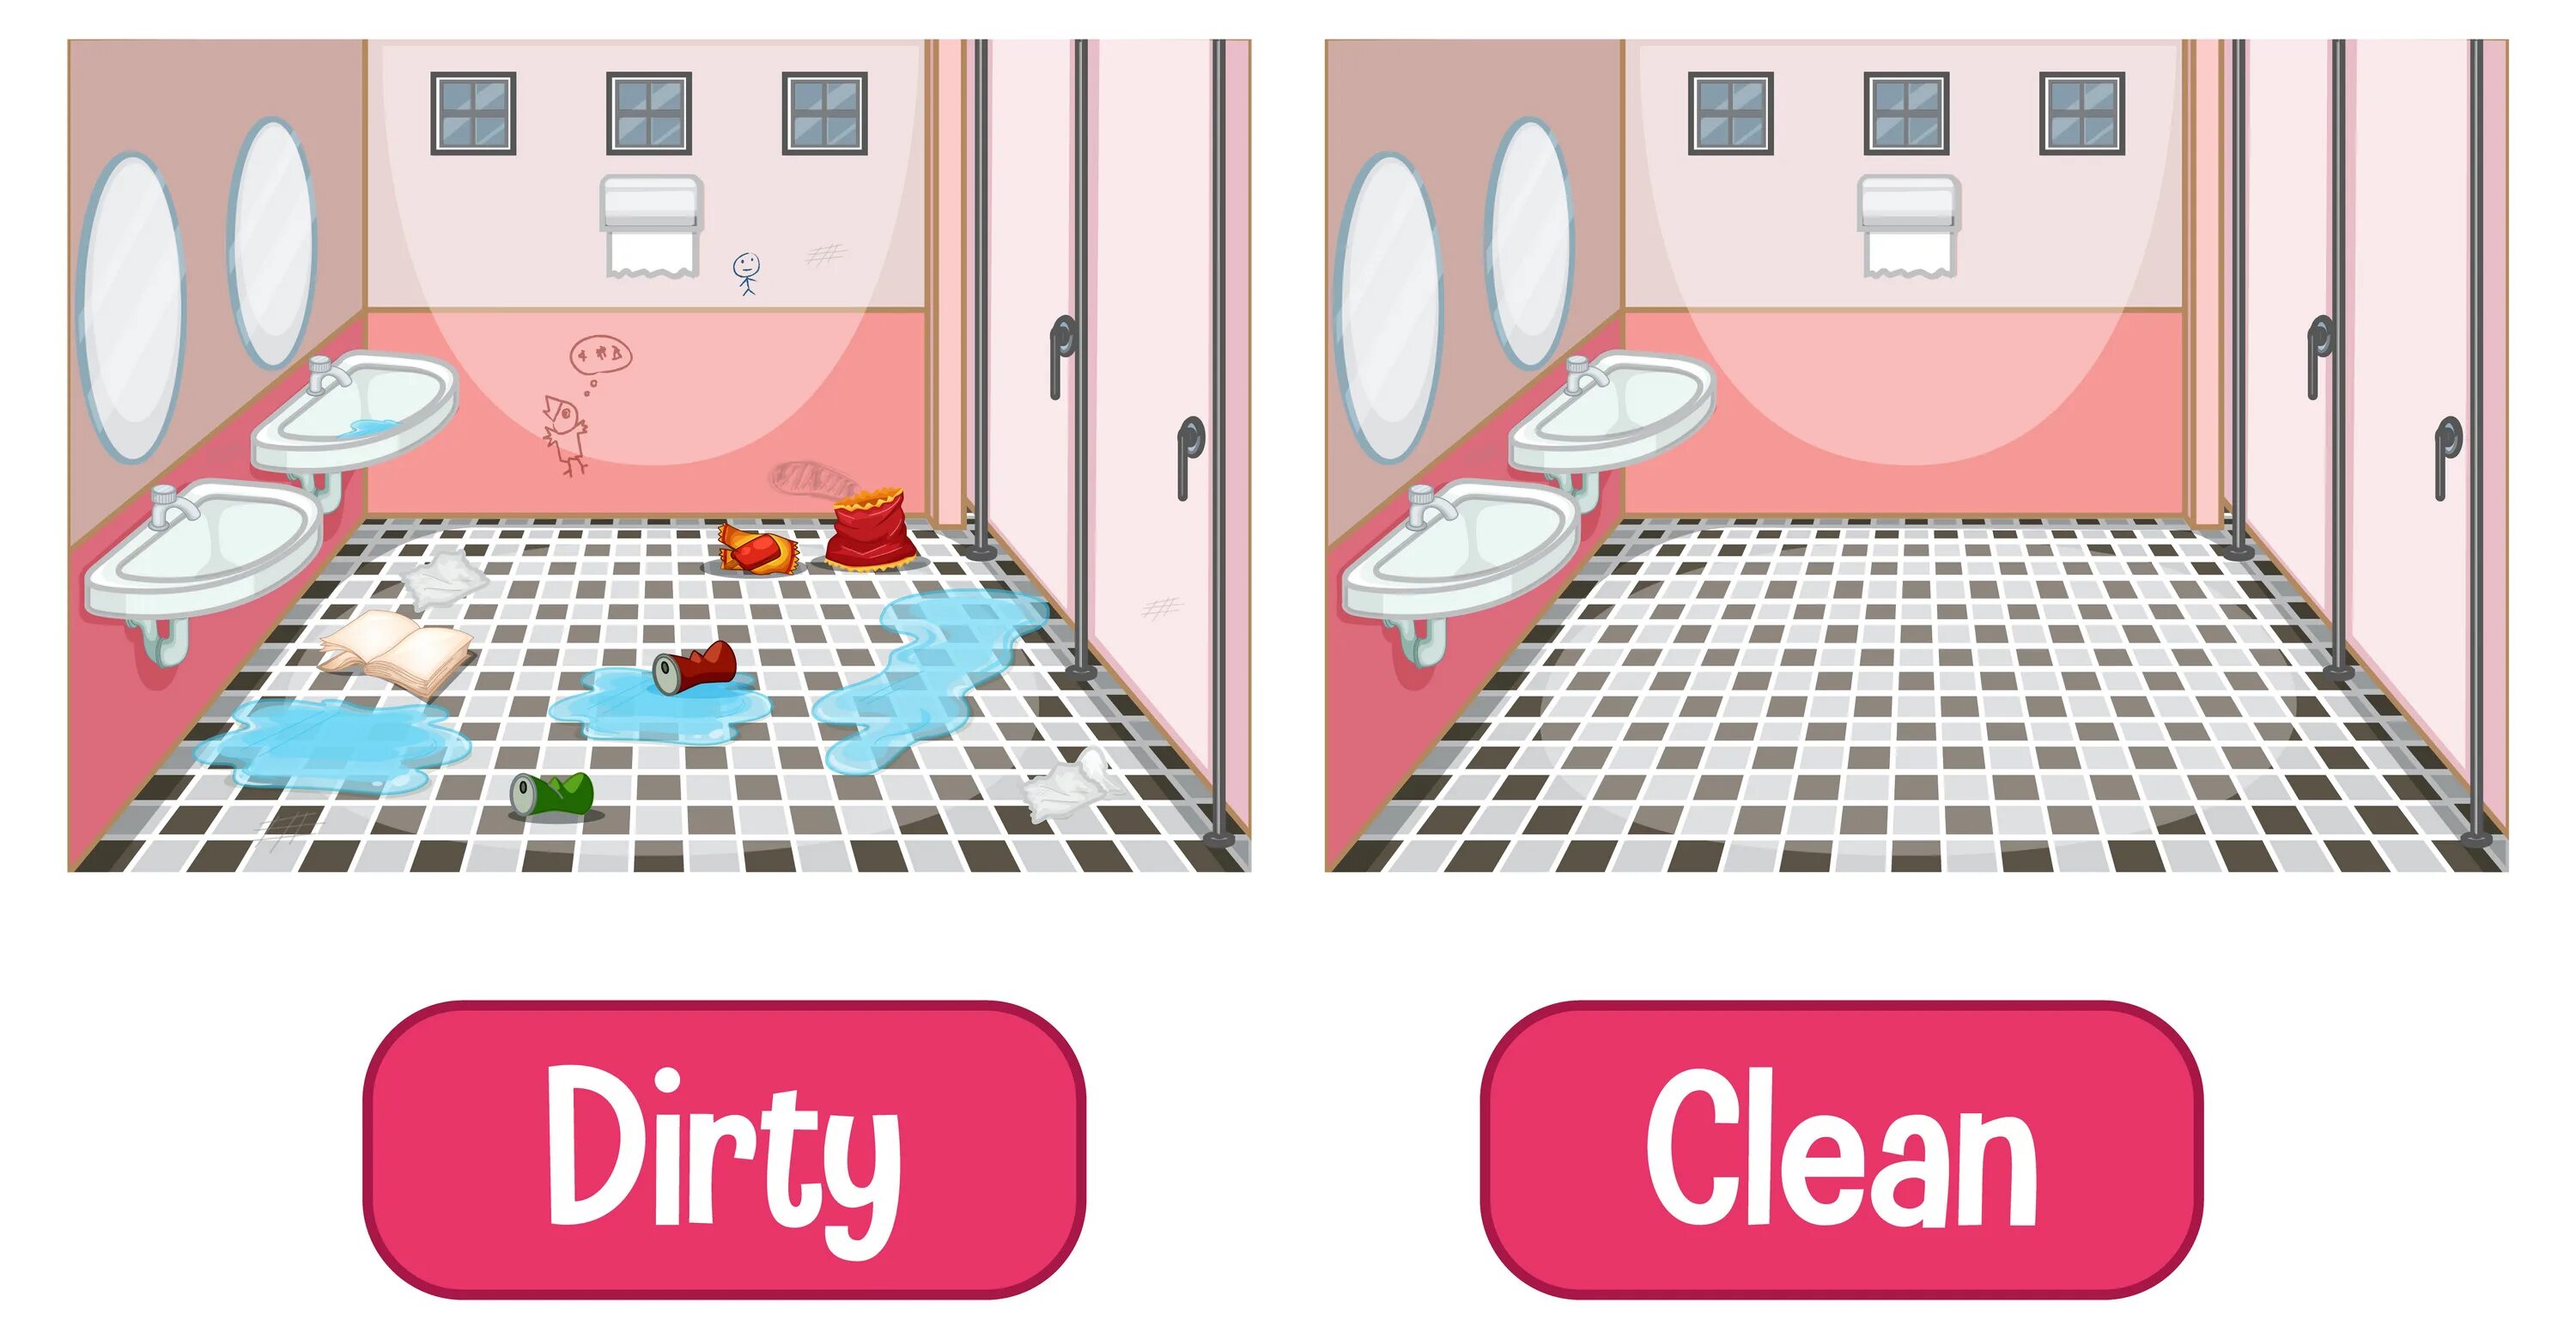 Clean Dirty картинка. Clean and Dirty for Kids. Clean Dirty картинка для детей. Opposite of clean.